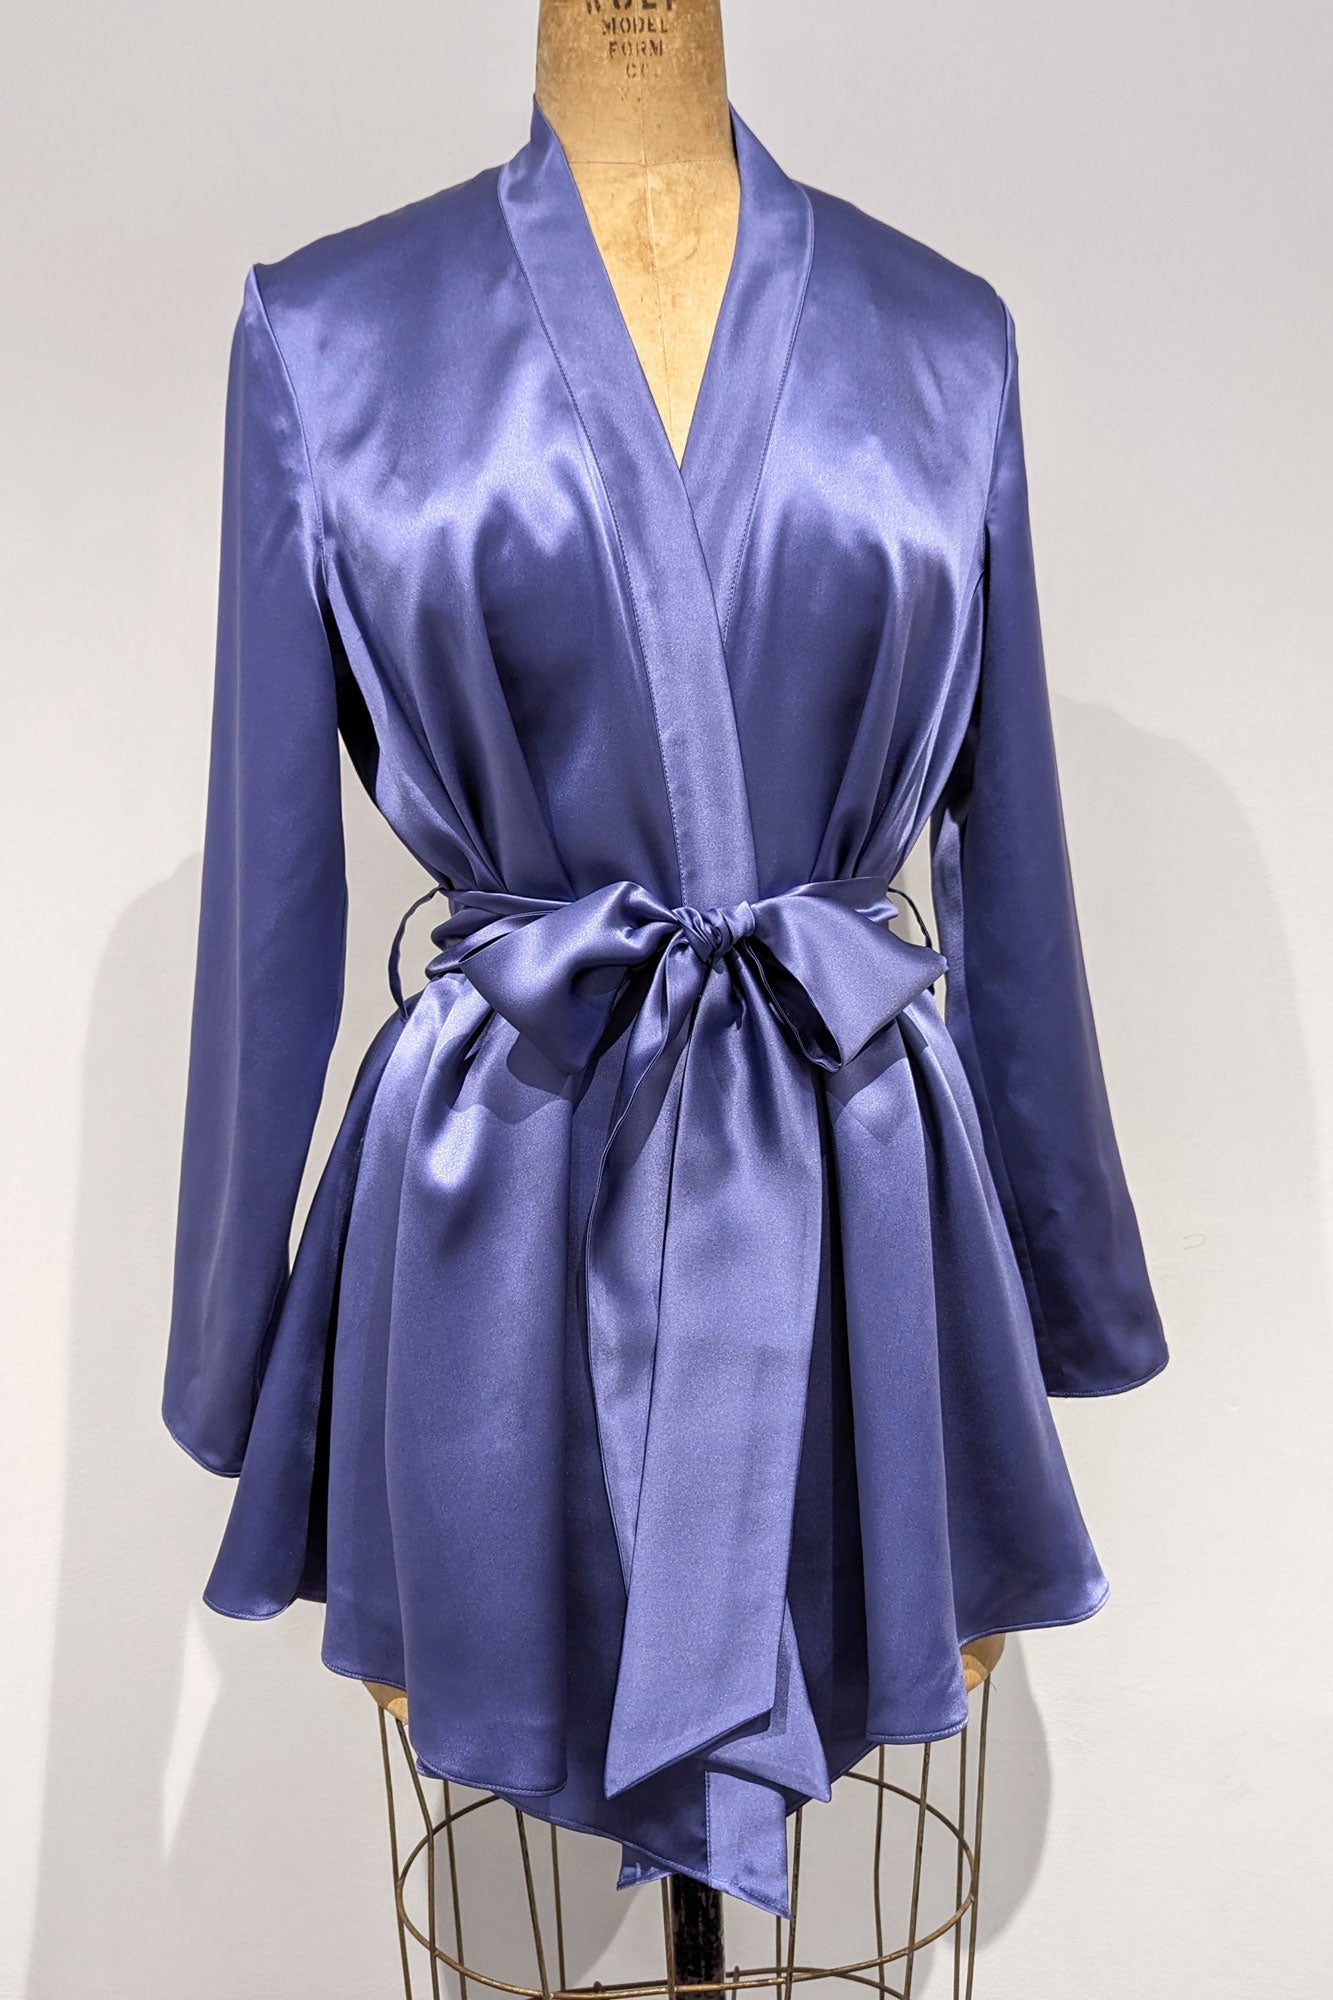 Kimono style silk robe in periwinkle blue with a large satin bow